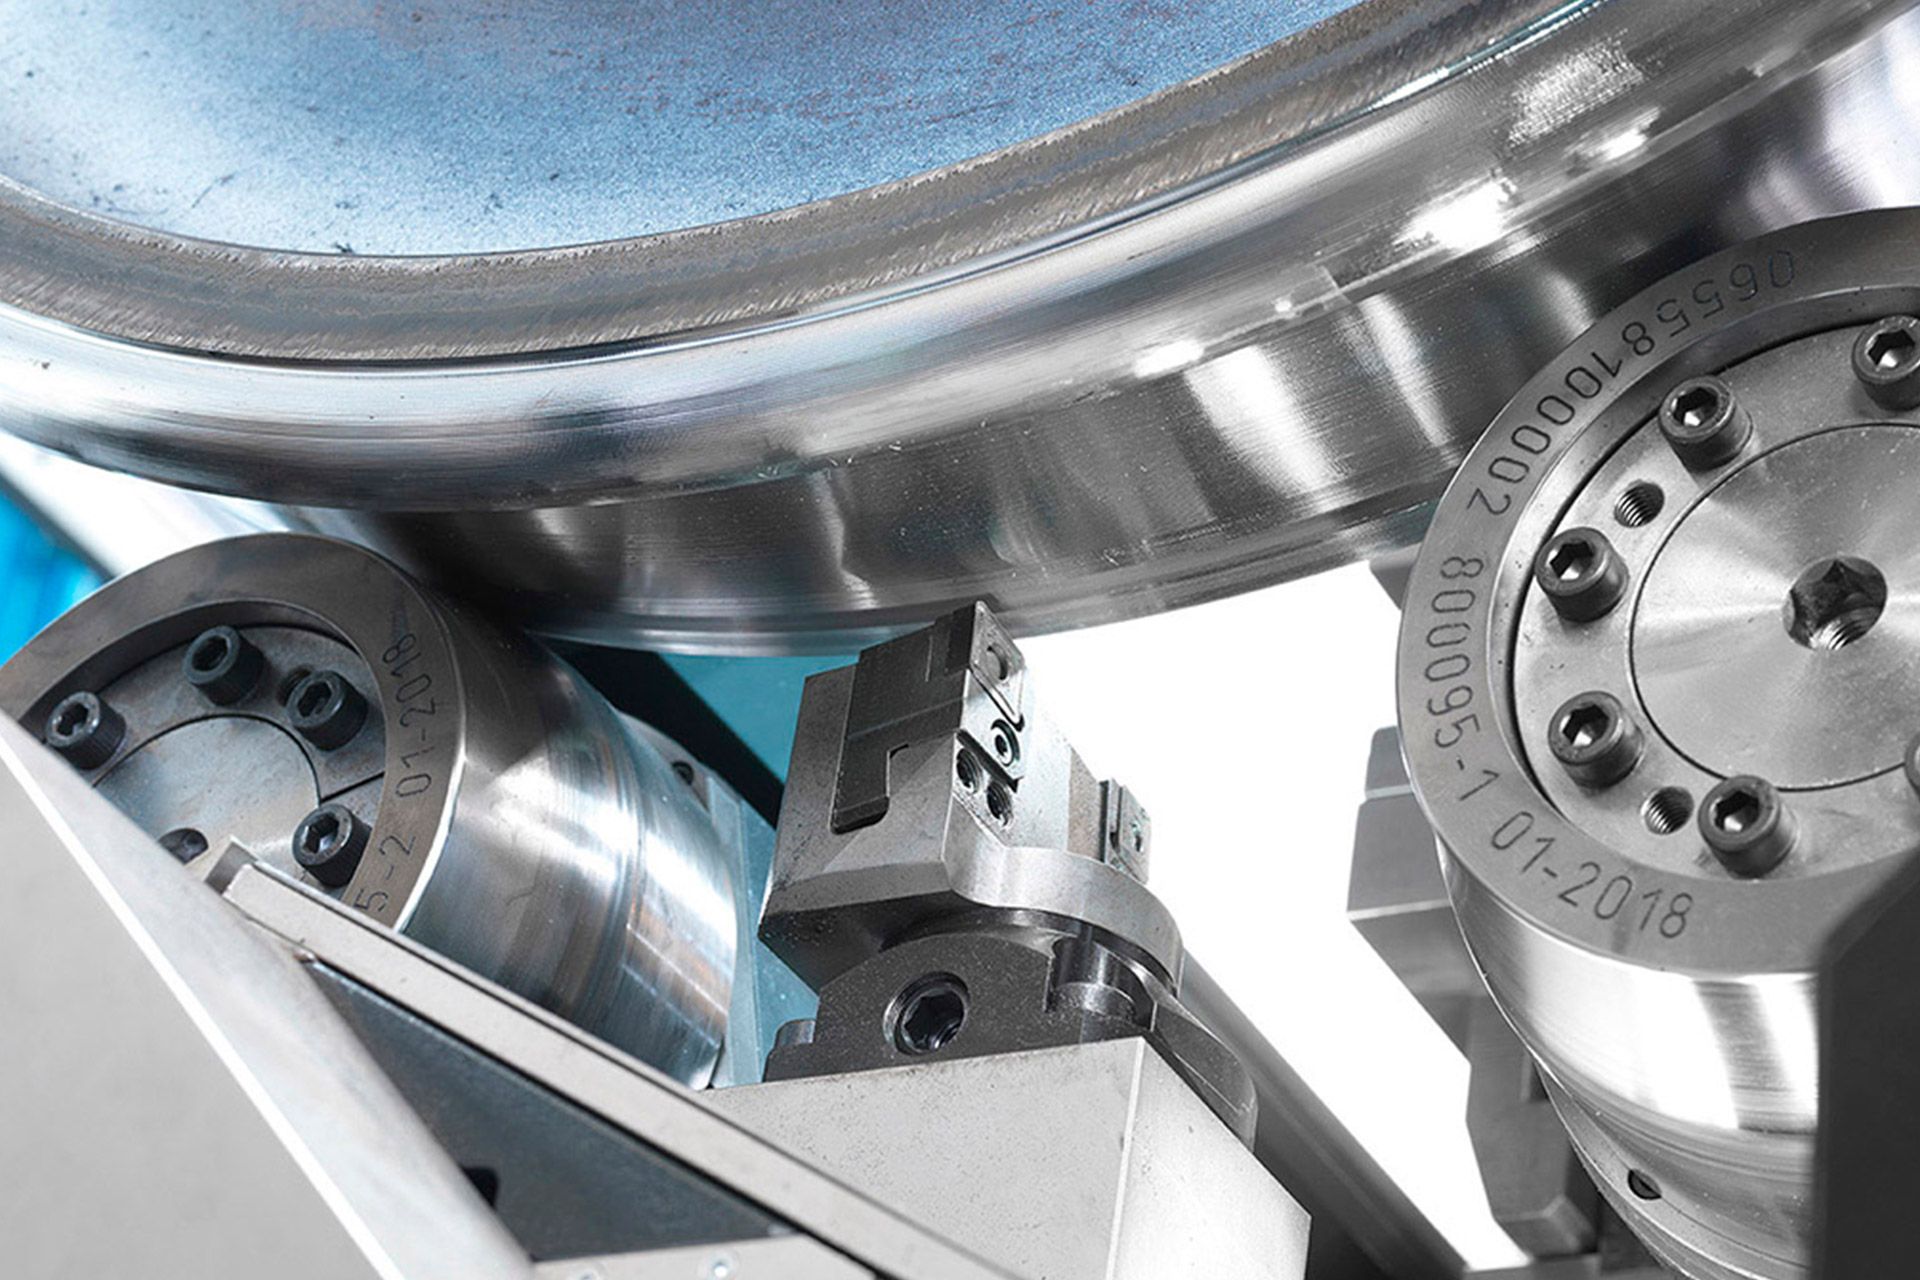 Machines for railway wheelsets, wheels and axles